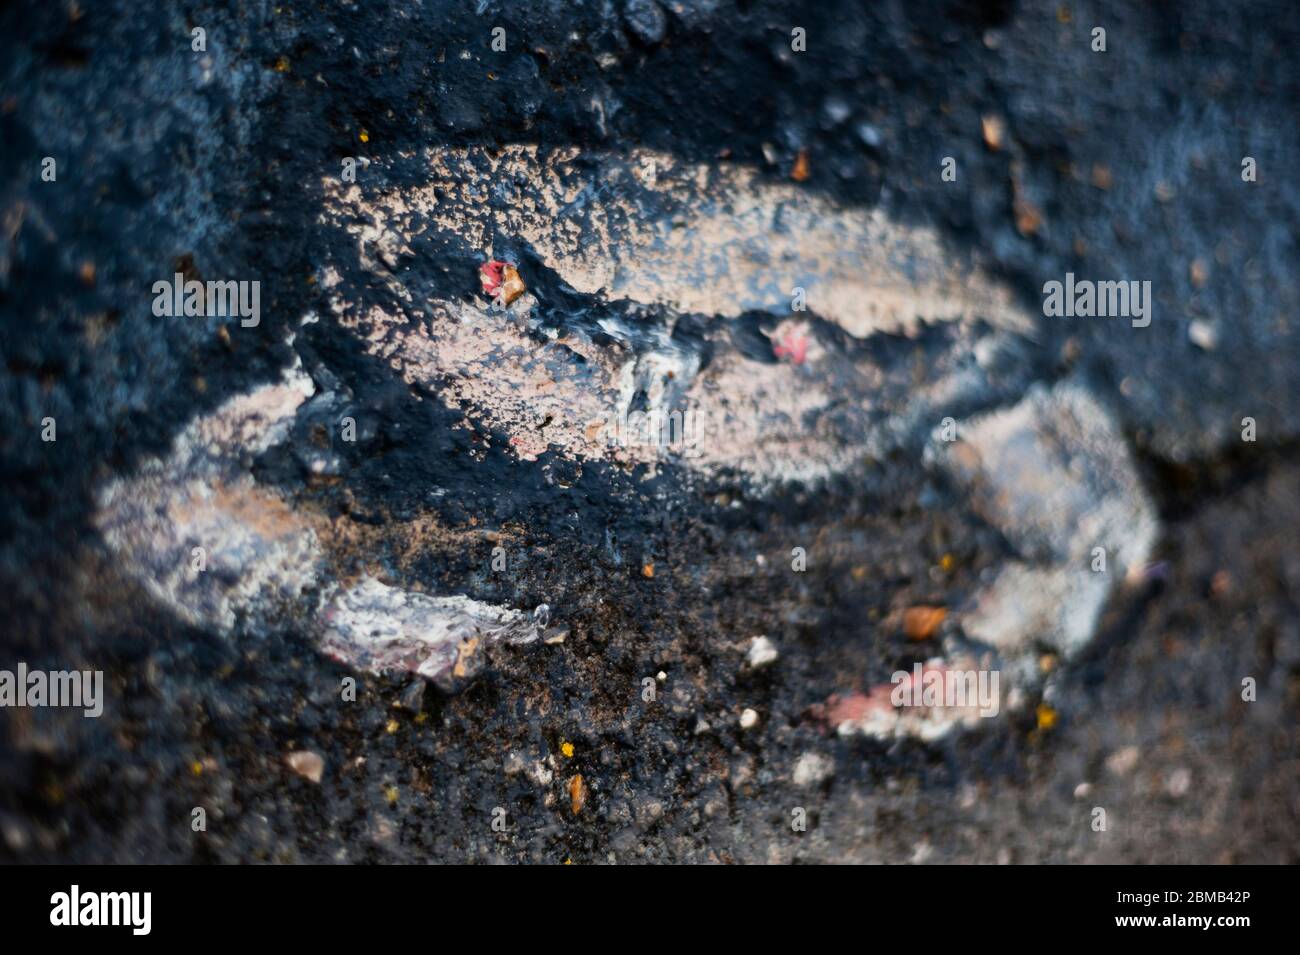 A crab, chalk drawing on a wall Stock Photo